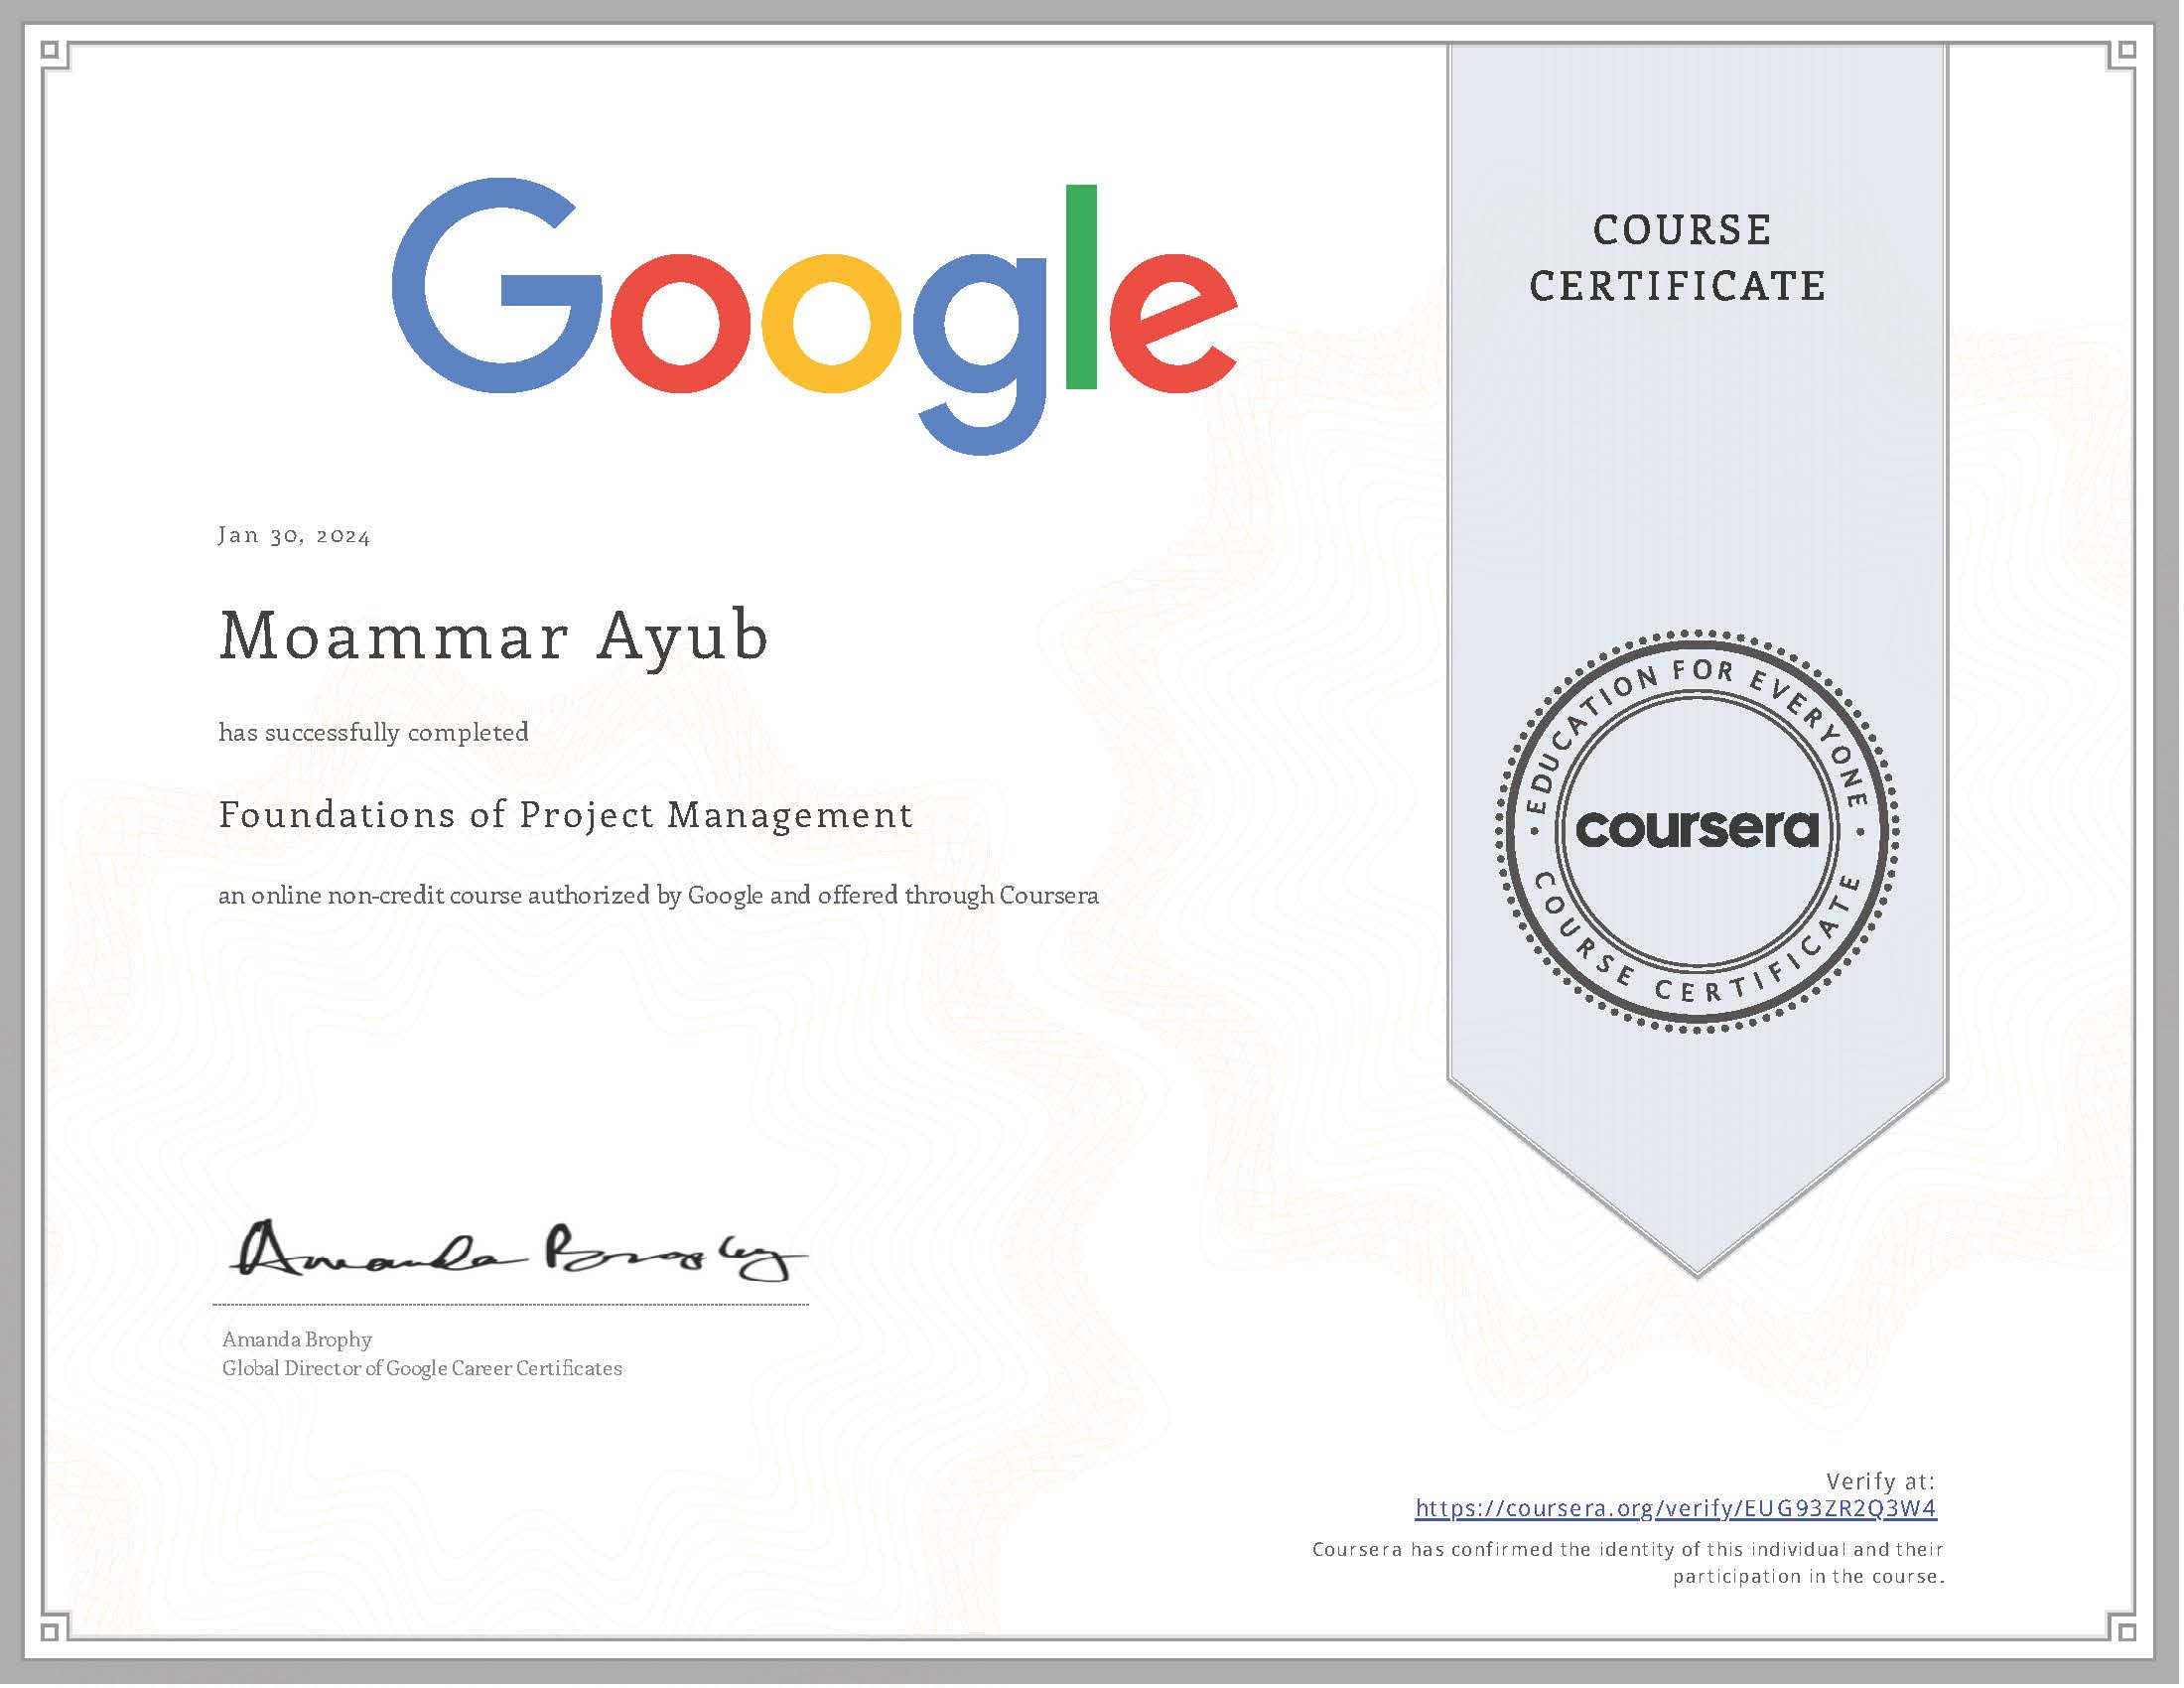 Project Management Certificate by Google